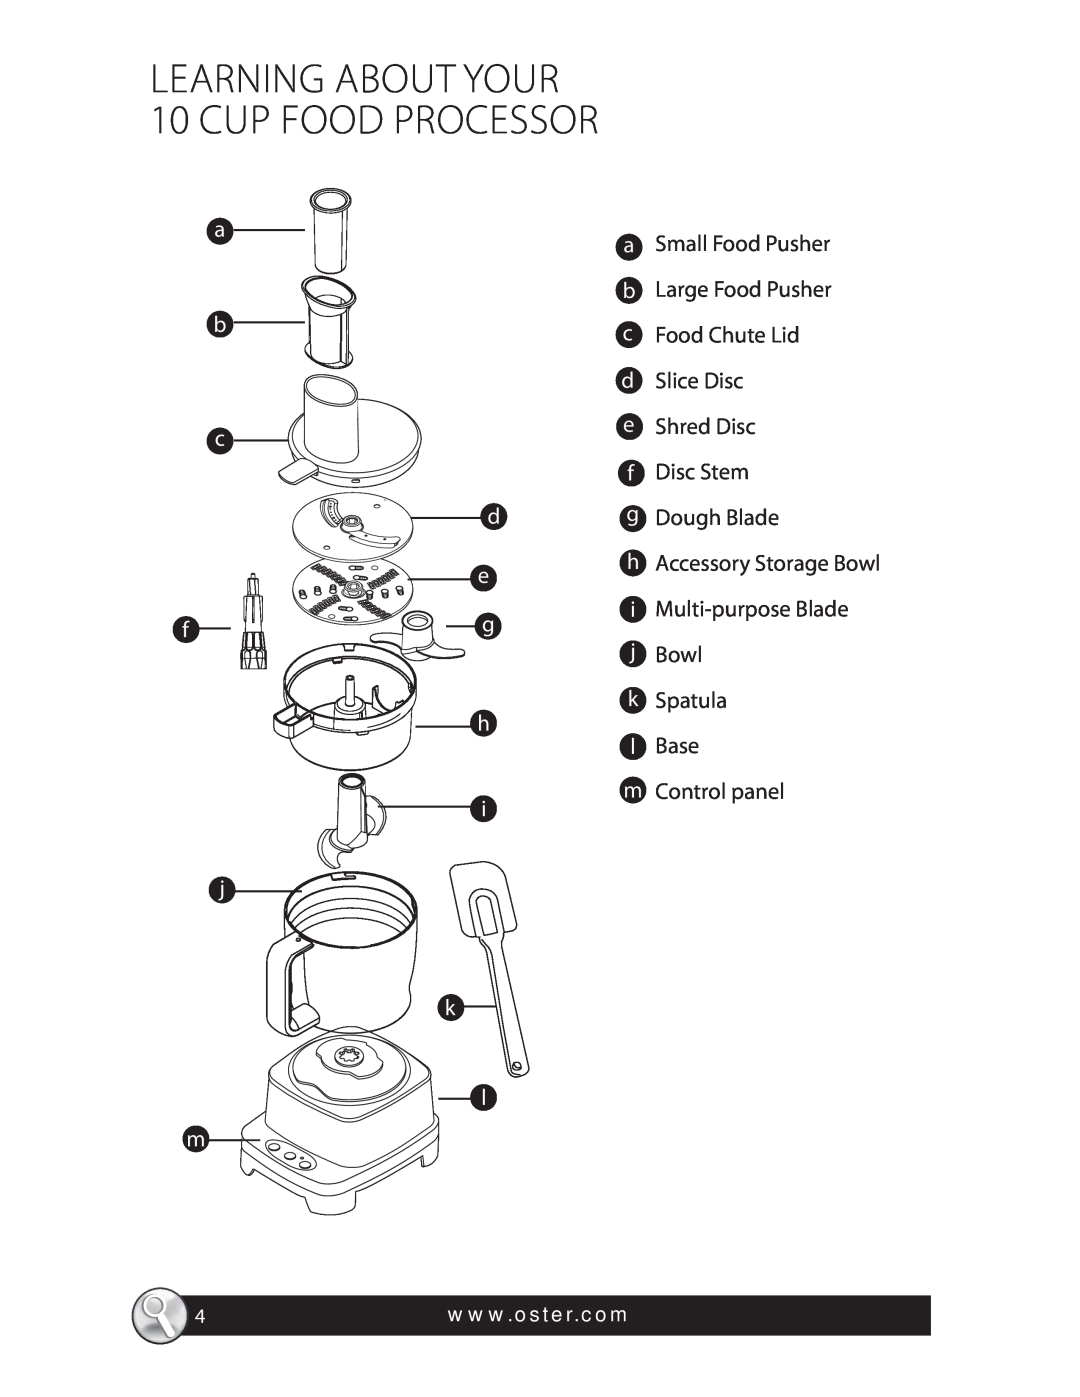 Oster SPR-121409, 137299, FPSTFP4600 warranty LEARNING ABOUT YOUR 10 CUP FOOD PROCESSOR, k l m 